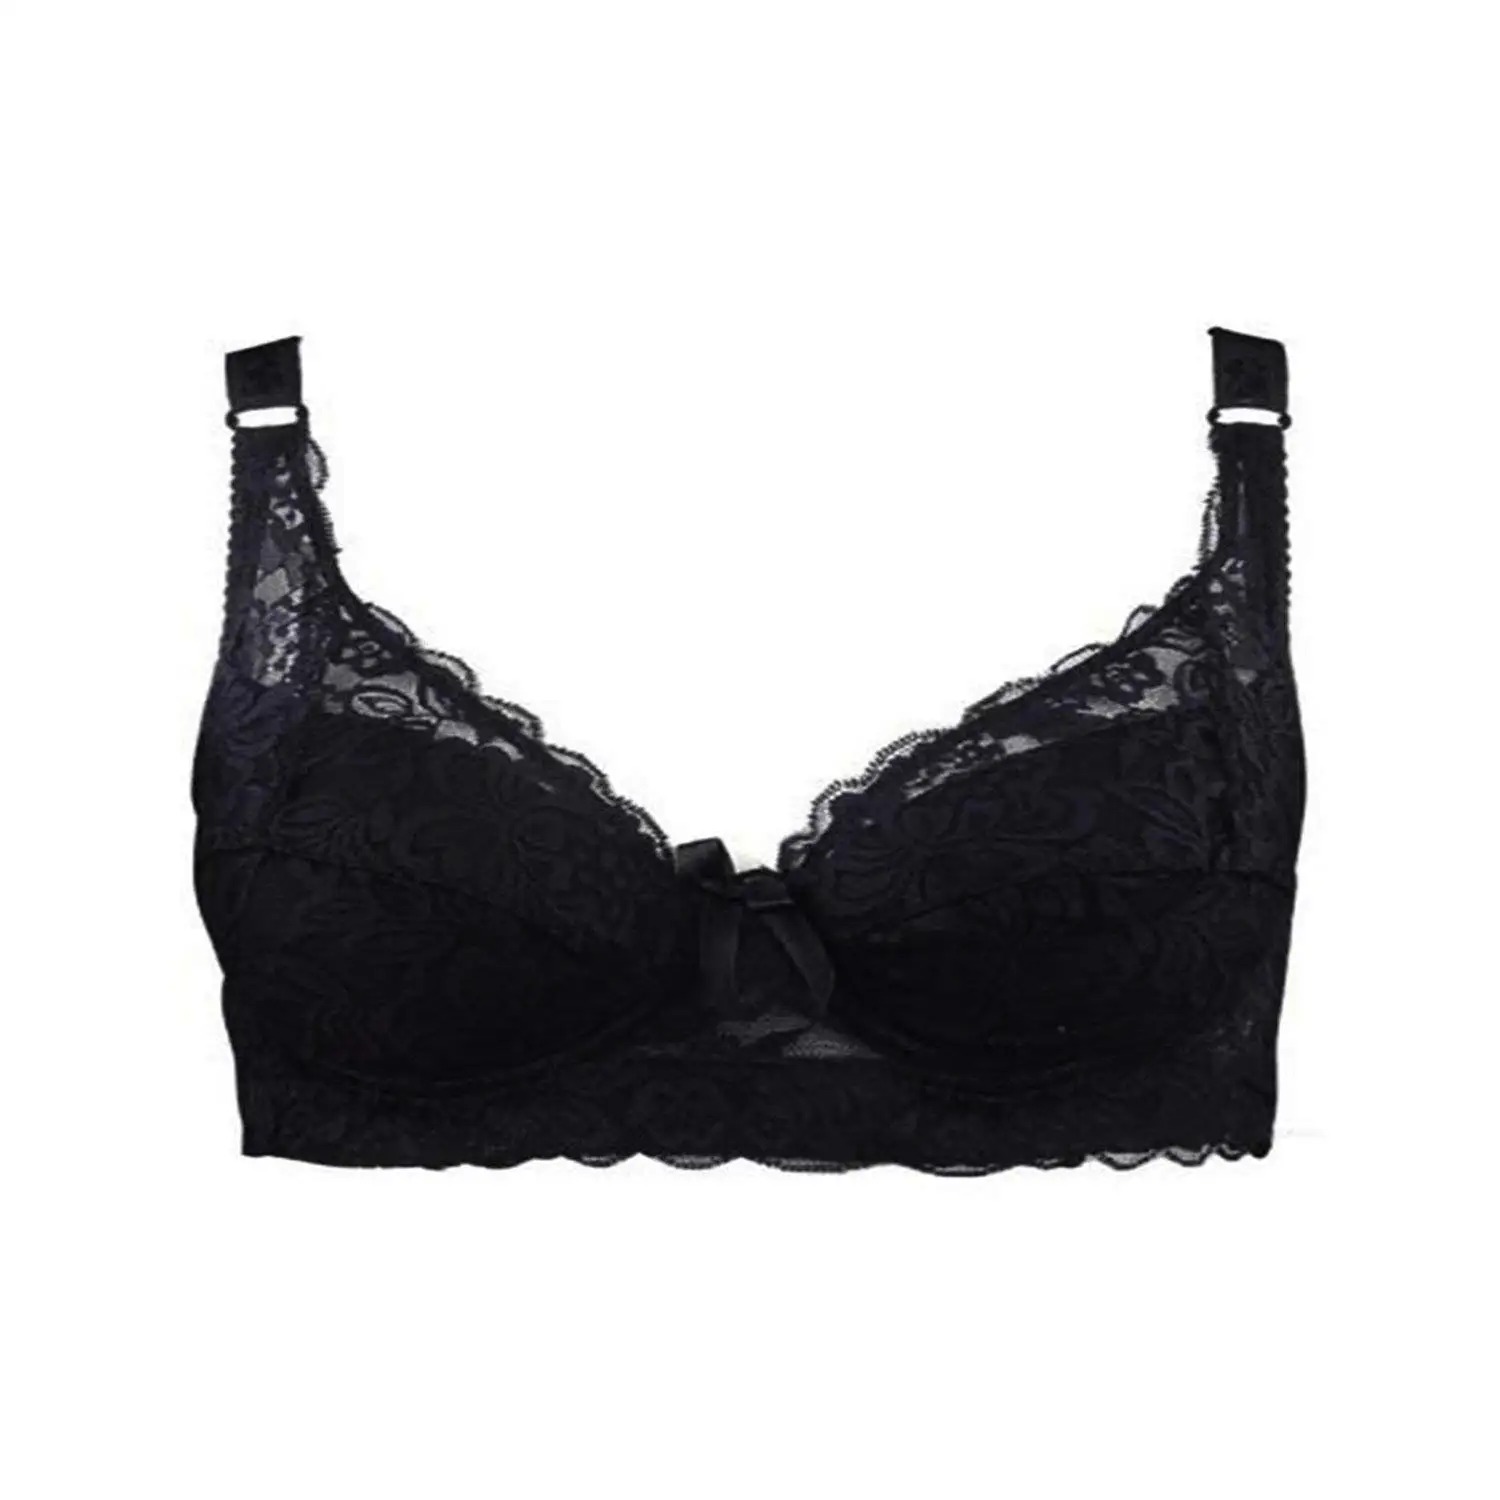 Cheap 40 Size Bra, find 40 Size Bra deals on line at Alibaba.com